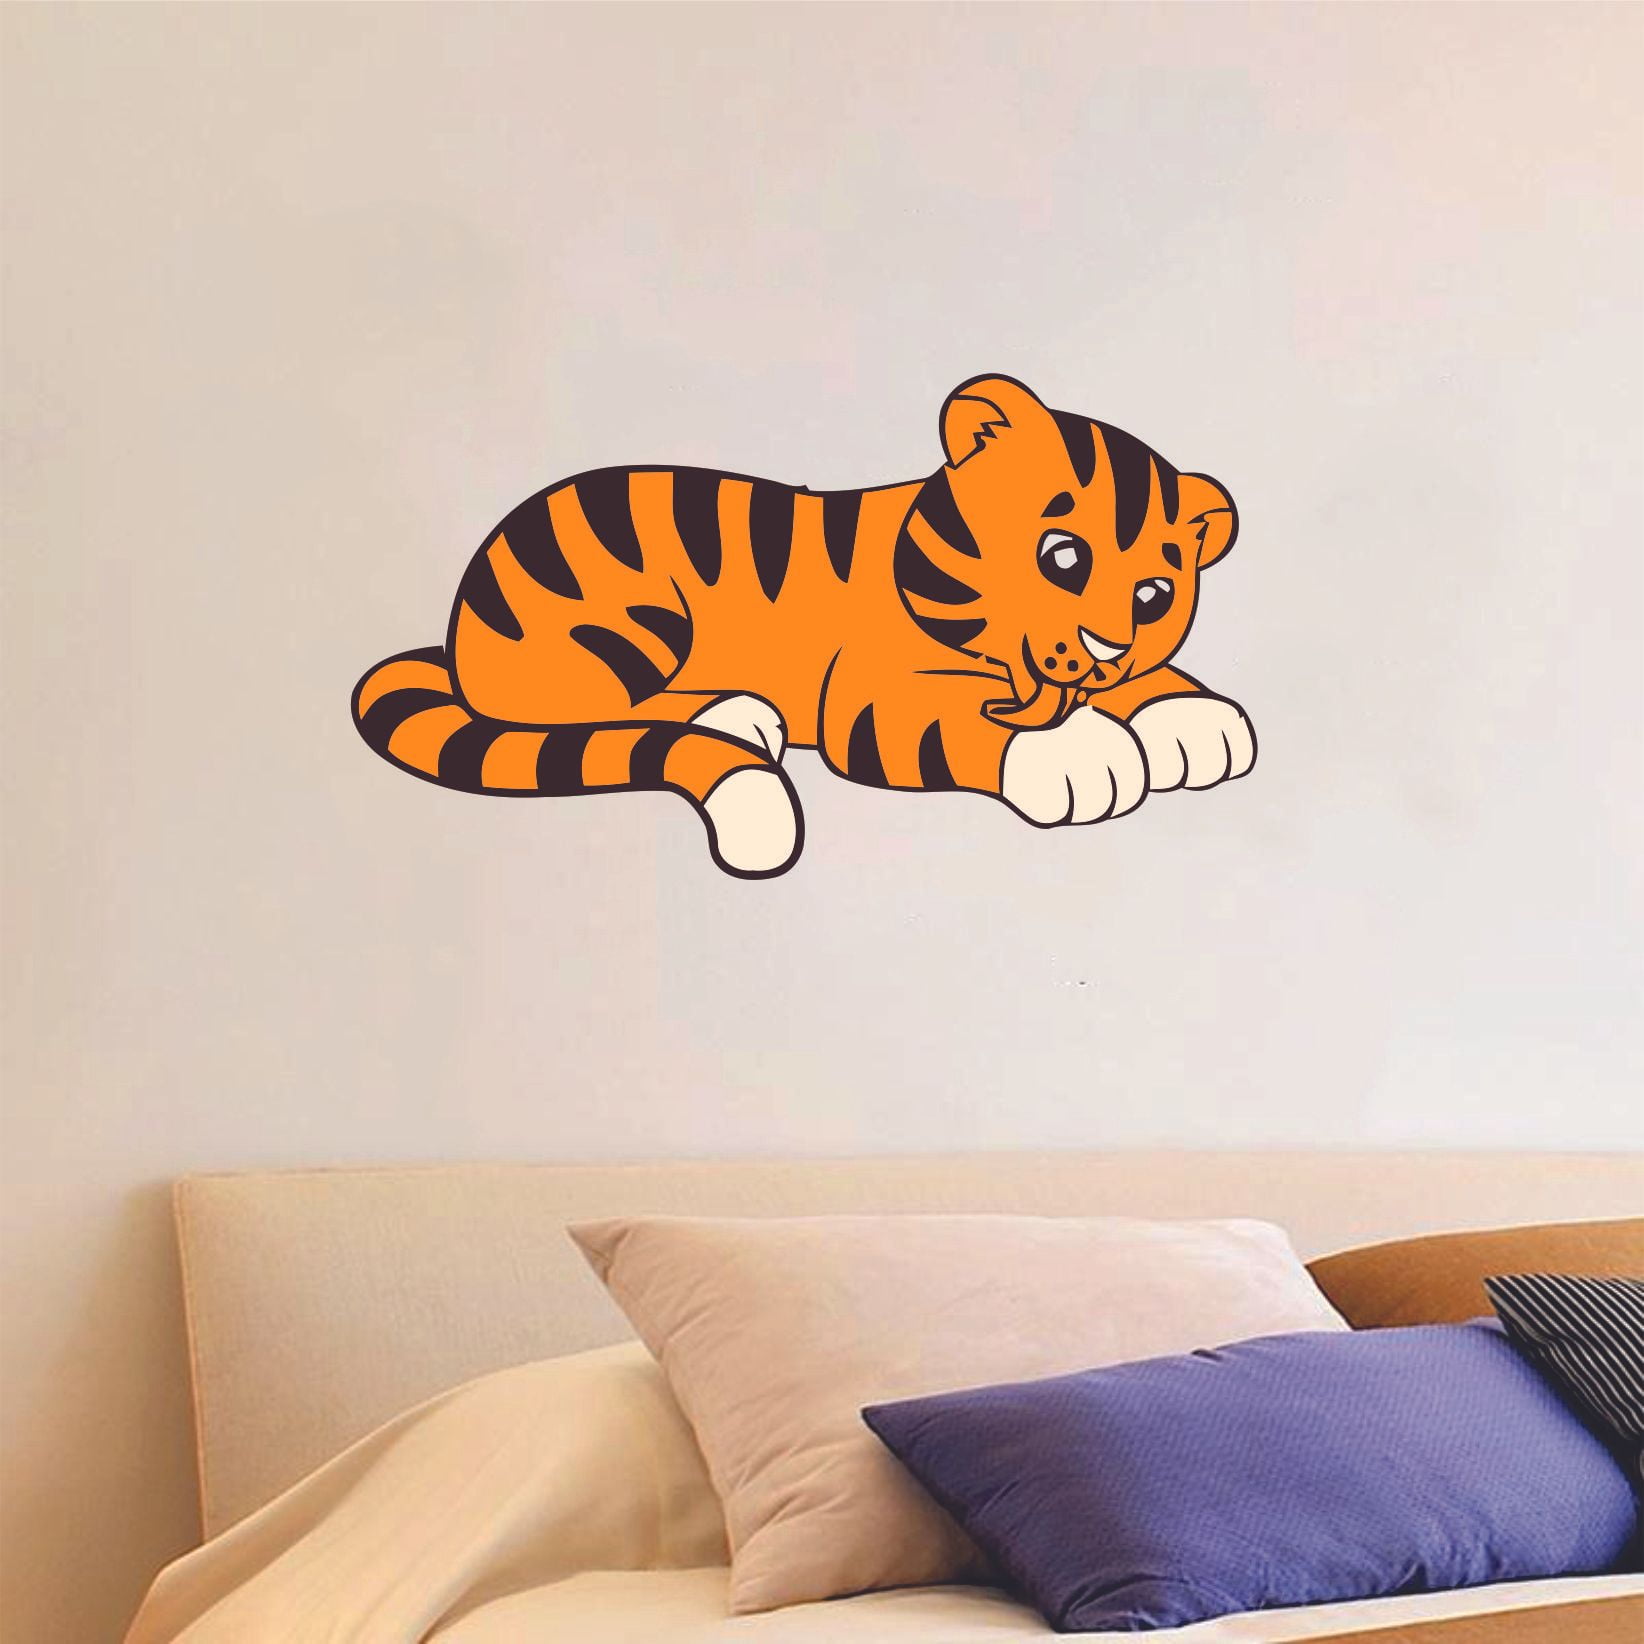 TIGERS DECALS STICKERS CAR WALLS FURNITURE ANY USE ZOO ANIMALS CHILDS KIDS 